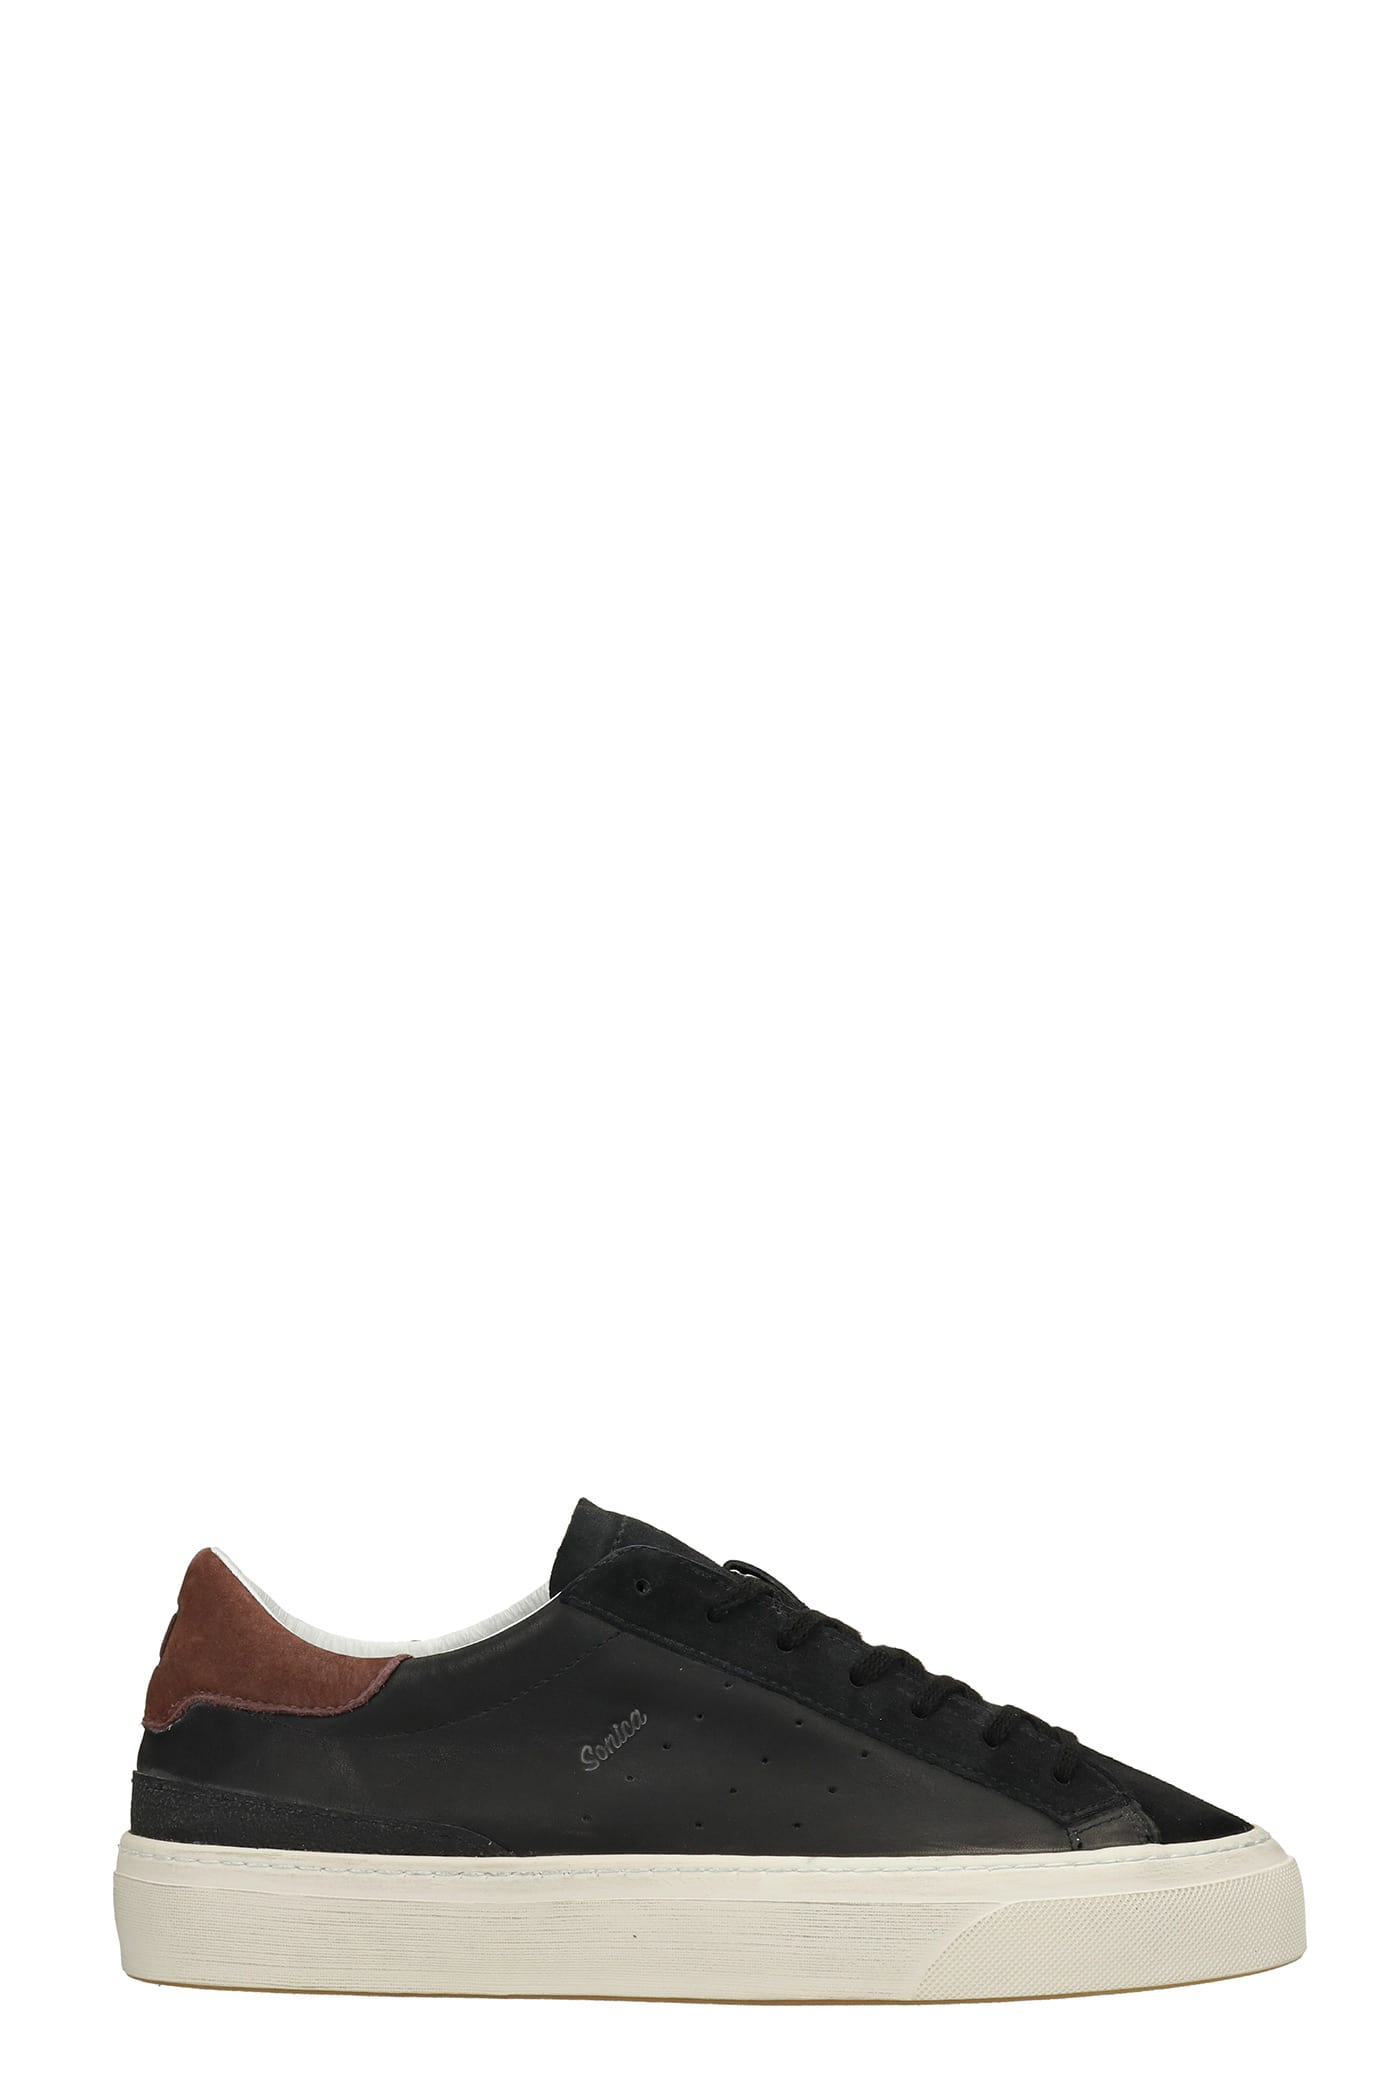 D.A.T.E. Sonica Sneakers In Black Suede And Leather